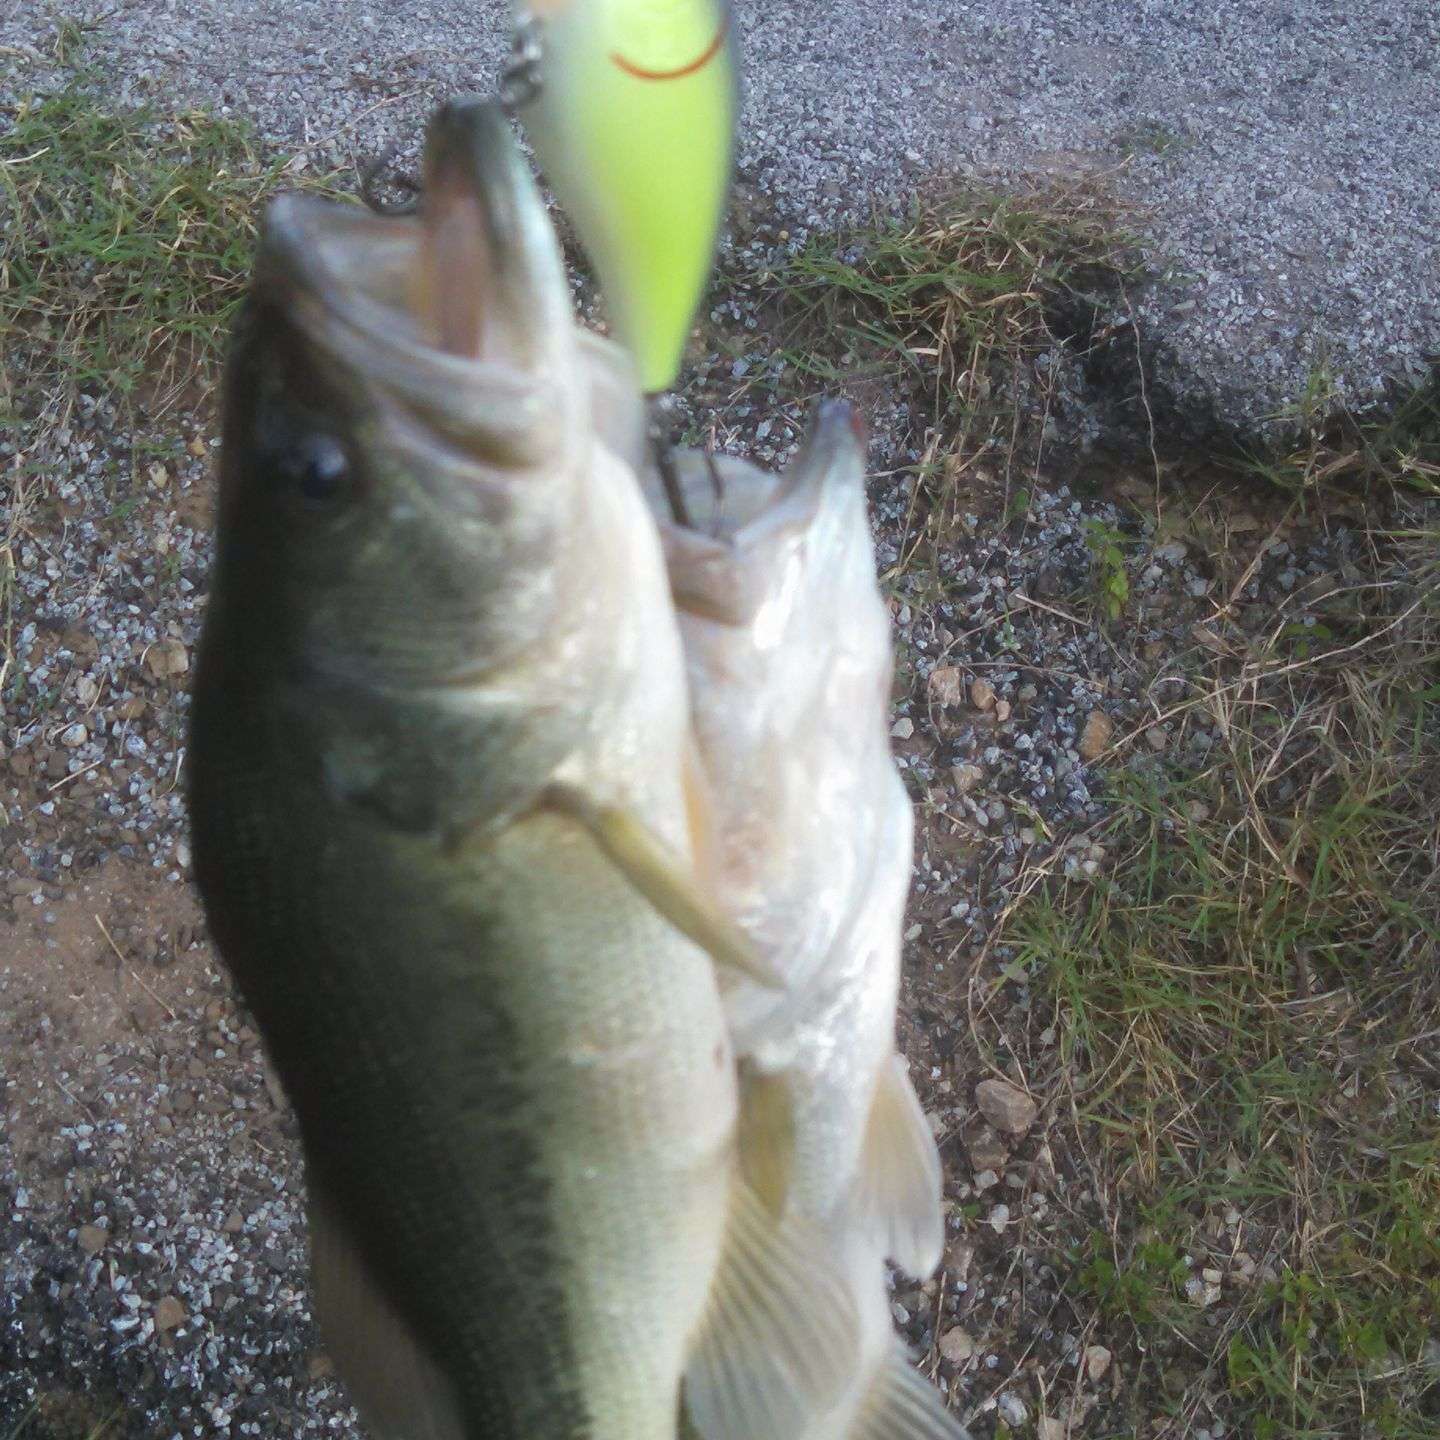 Jason May via Facebook: For the first time yesterday on Wheeler Lake in Alabama happened on back to back cast
